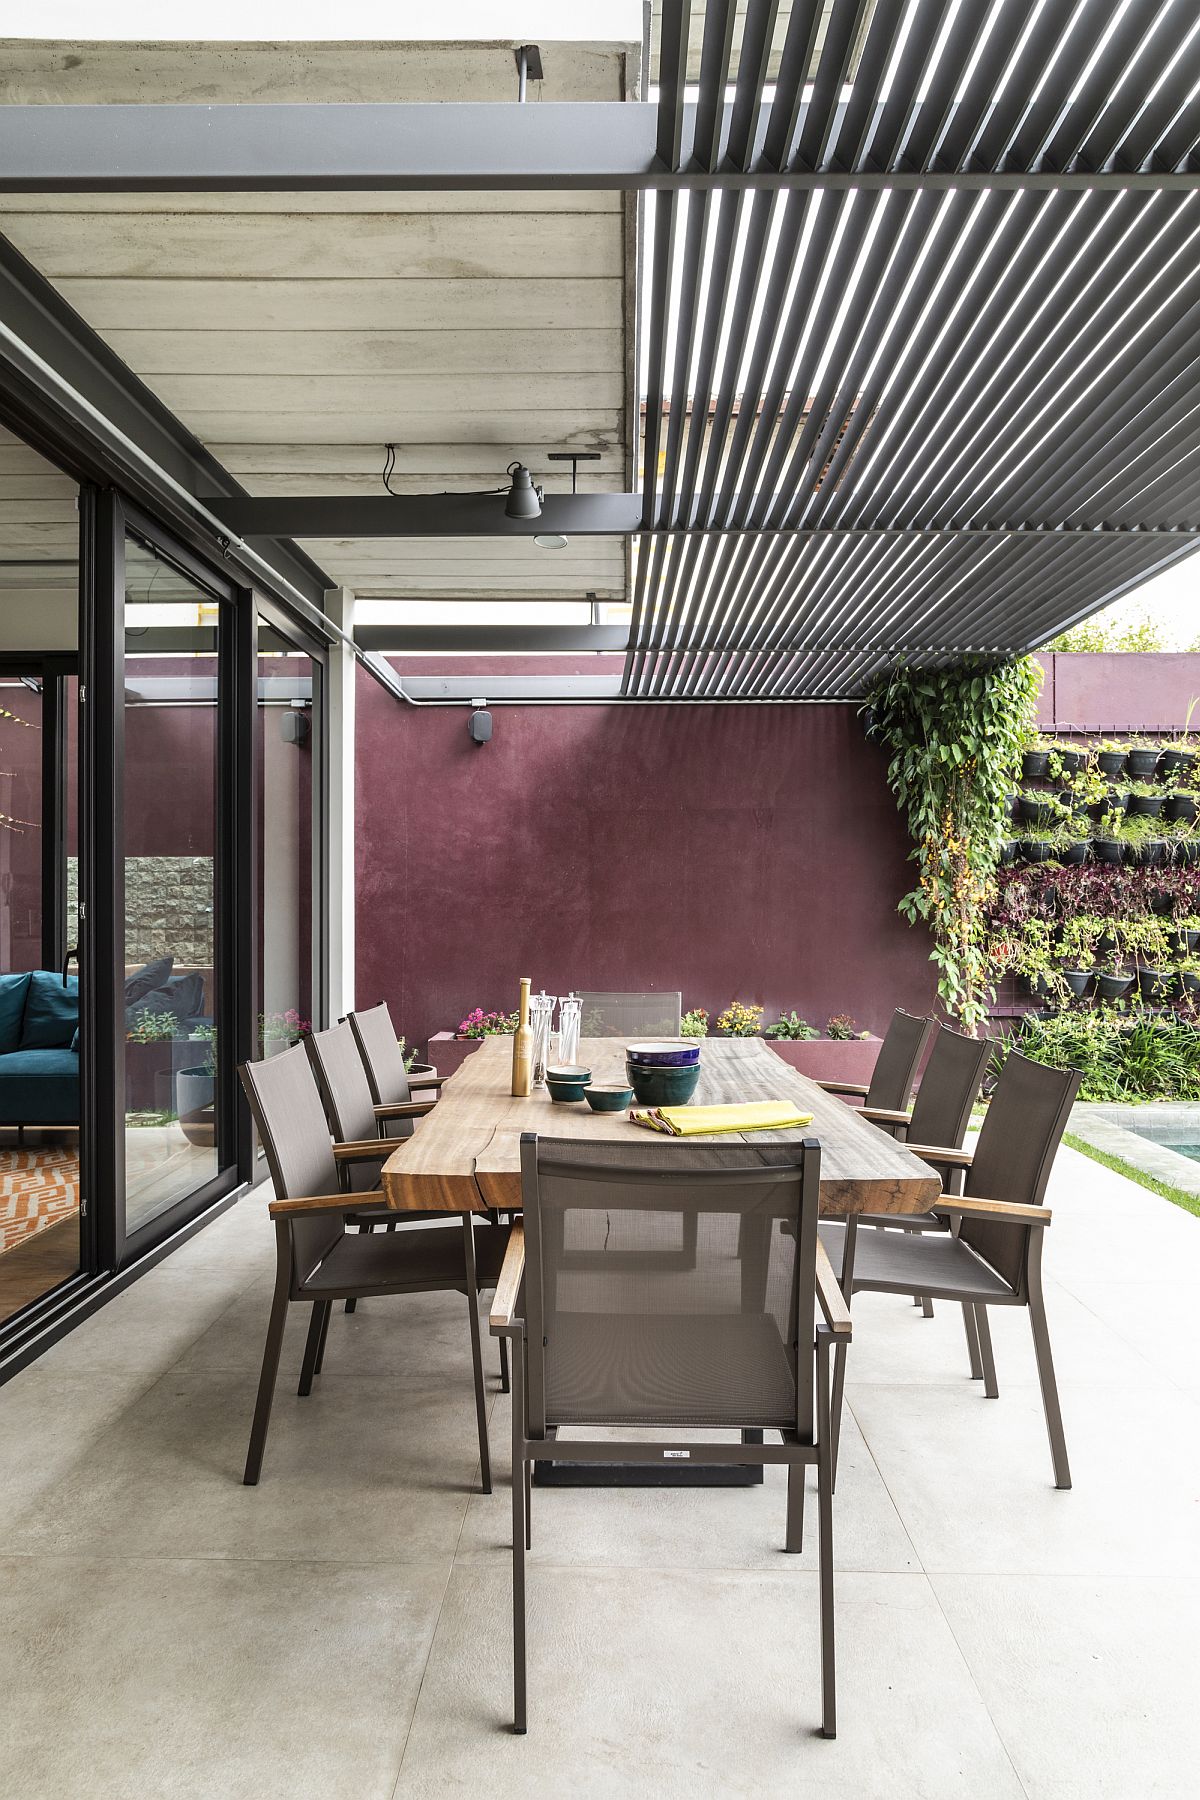 Outdoor covered dining area of the Brazilian home is connected with the living area